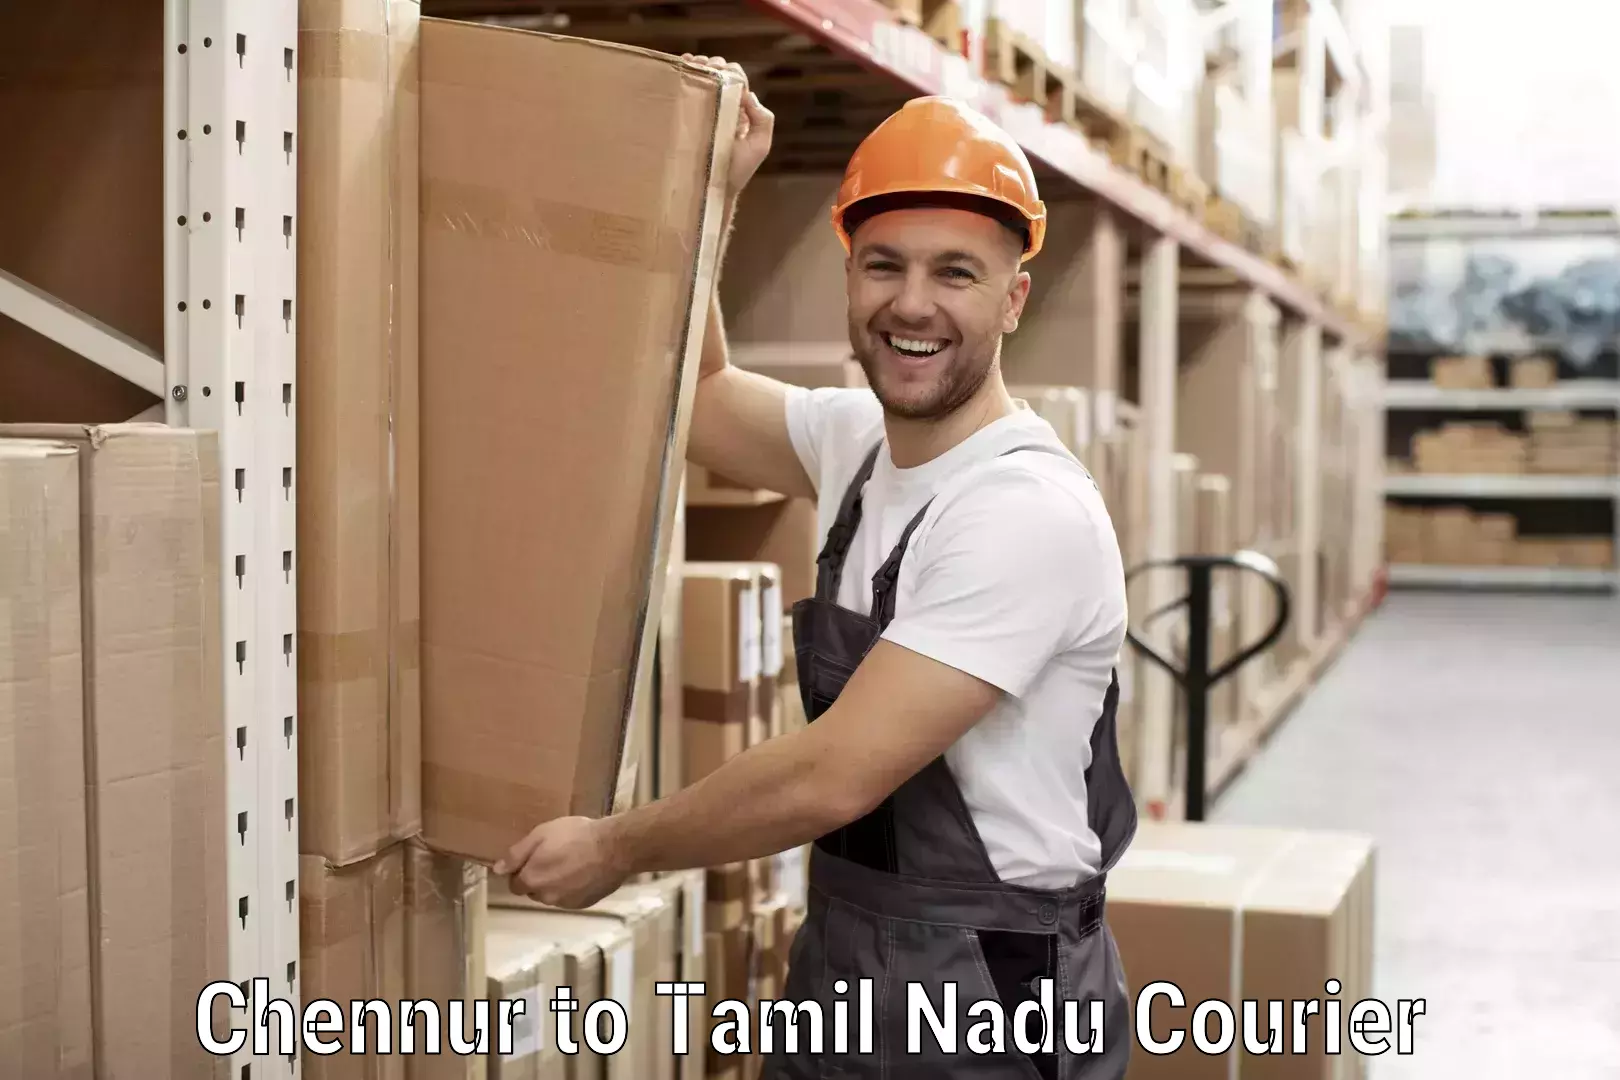 State-of-the-art courier technology Chennur to Tamil Nadu